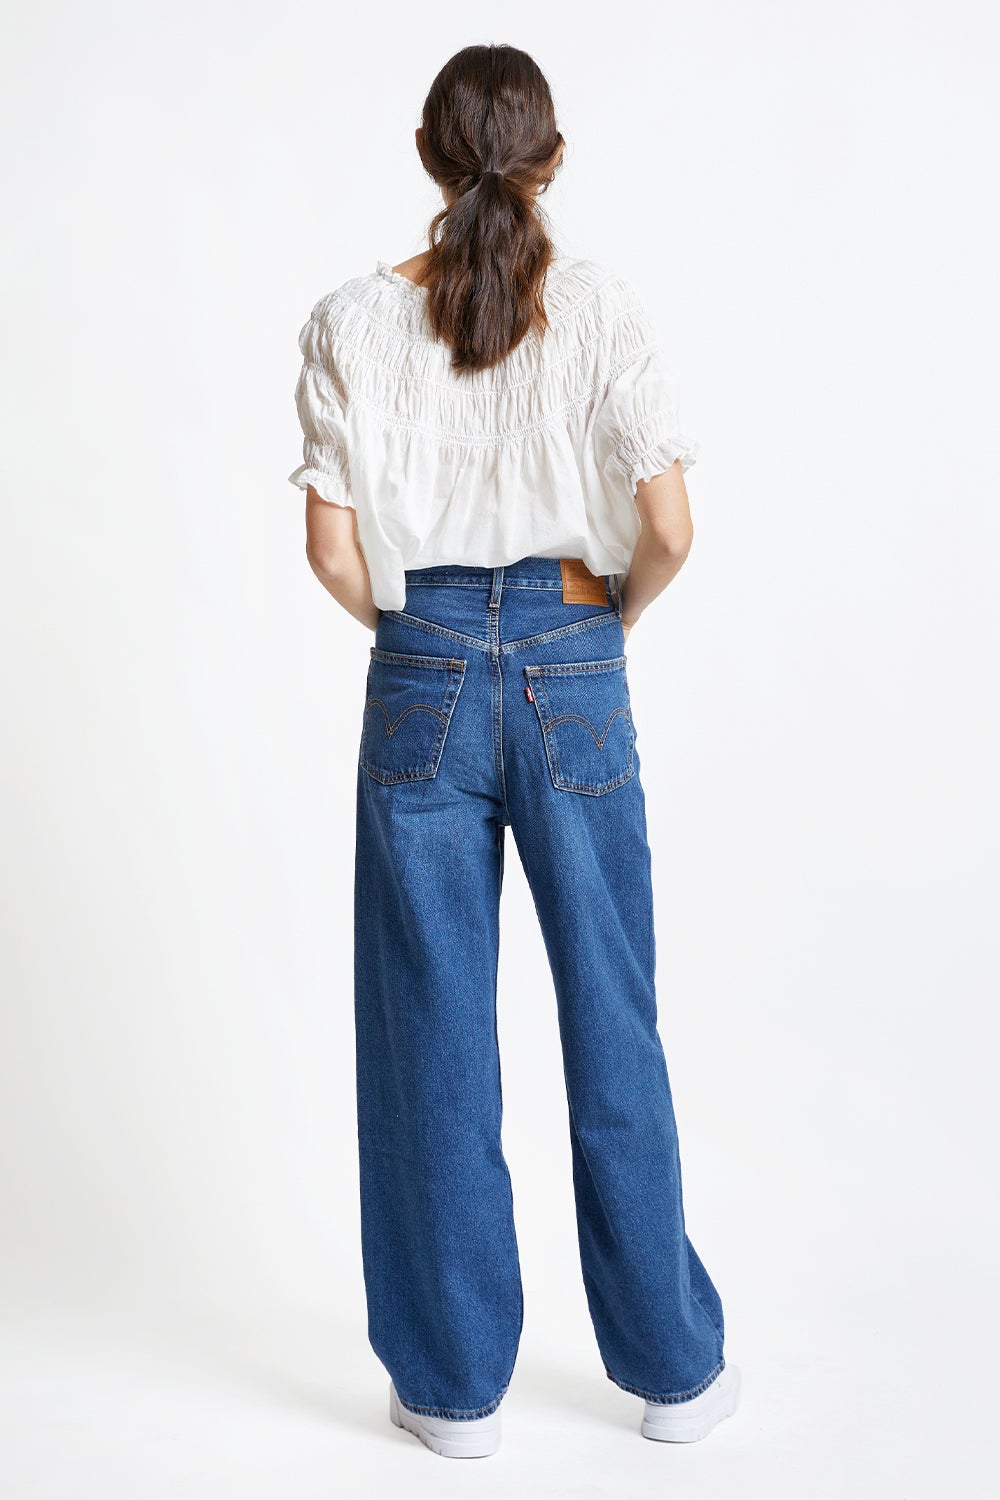 Levi's High Loose Jeans Show Off 